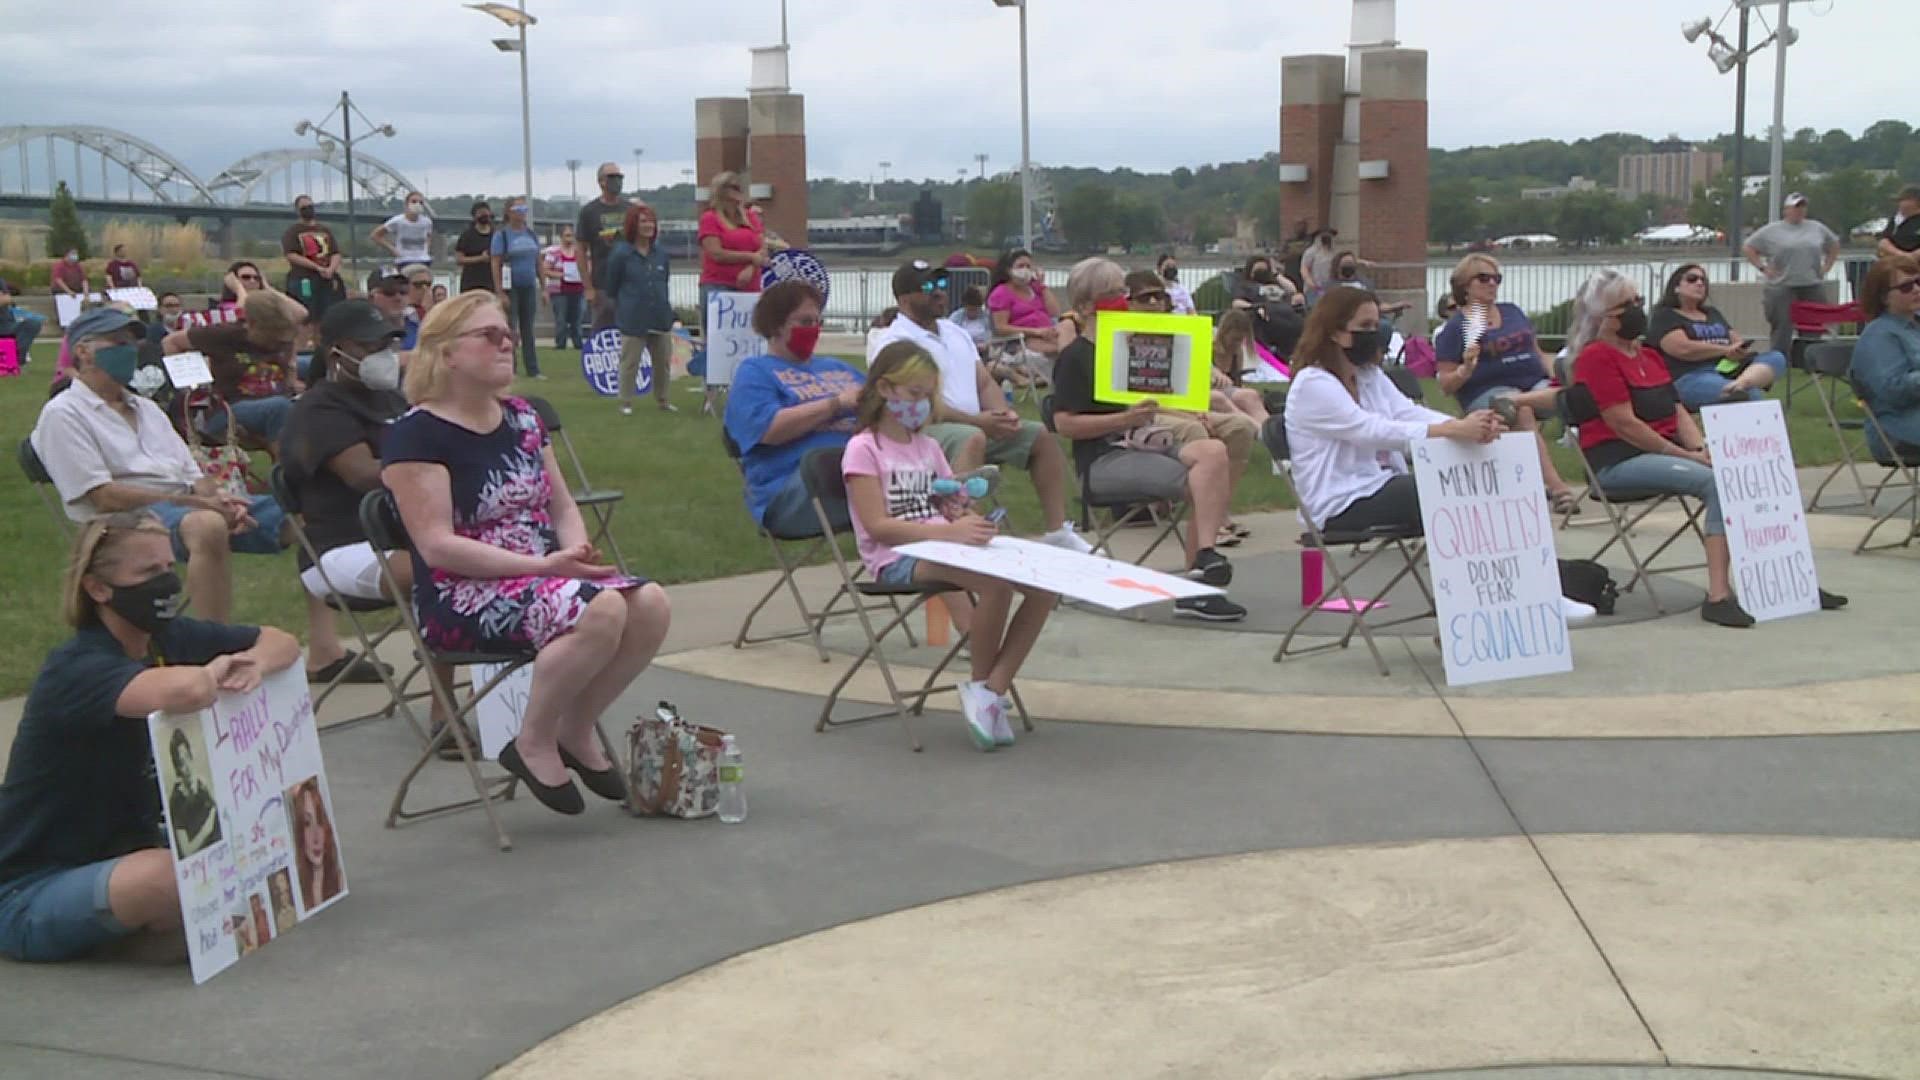 Hundreds of women rallied in Rock Island Saturday afternoon to protest strict abortion laws passed in Texas.